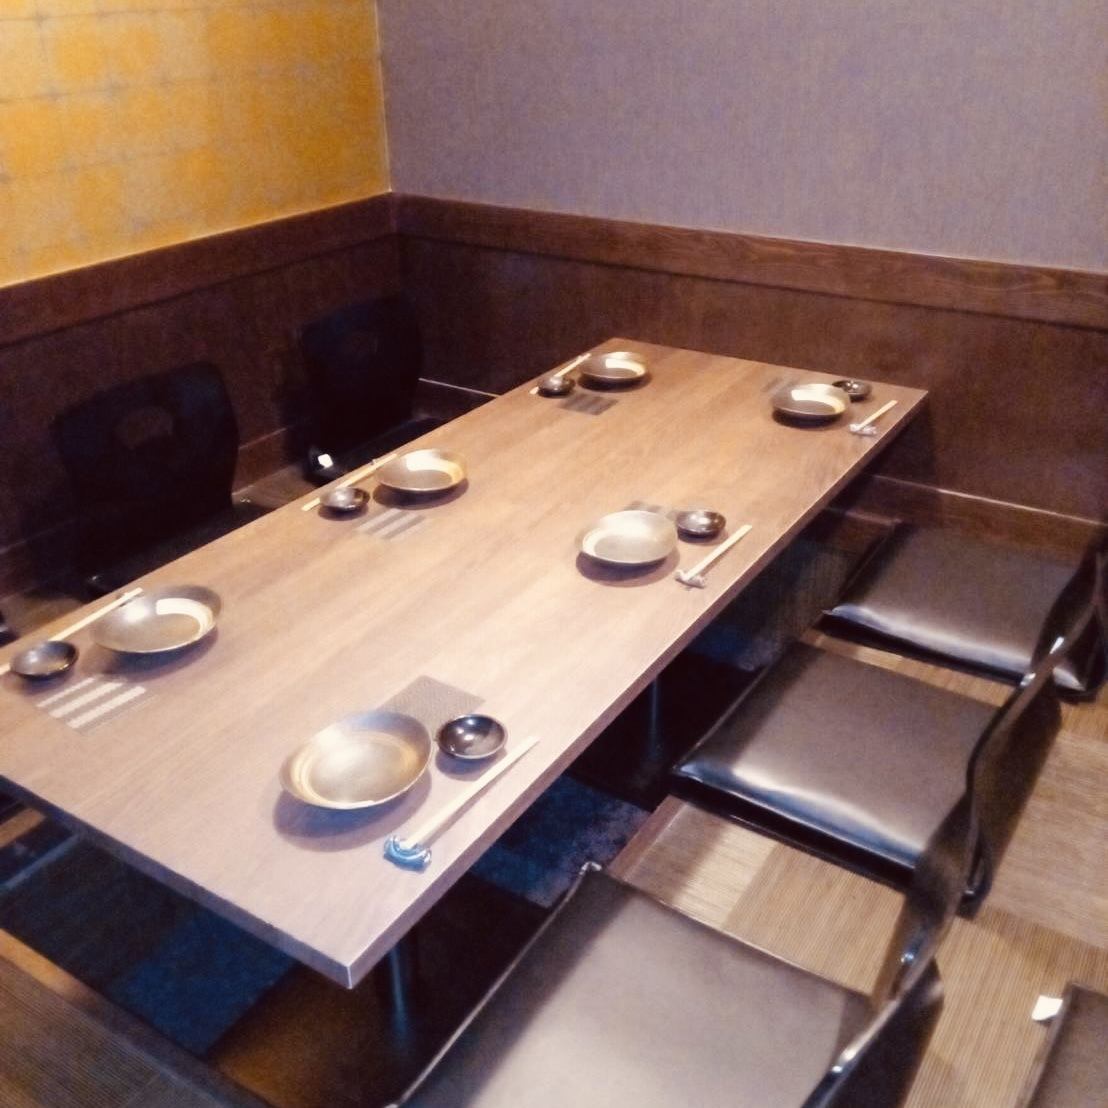 We have private rooms with sunken kotatsu seats.It can be used for various banquets.